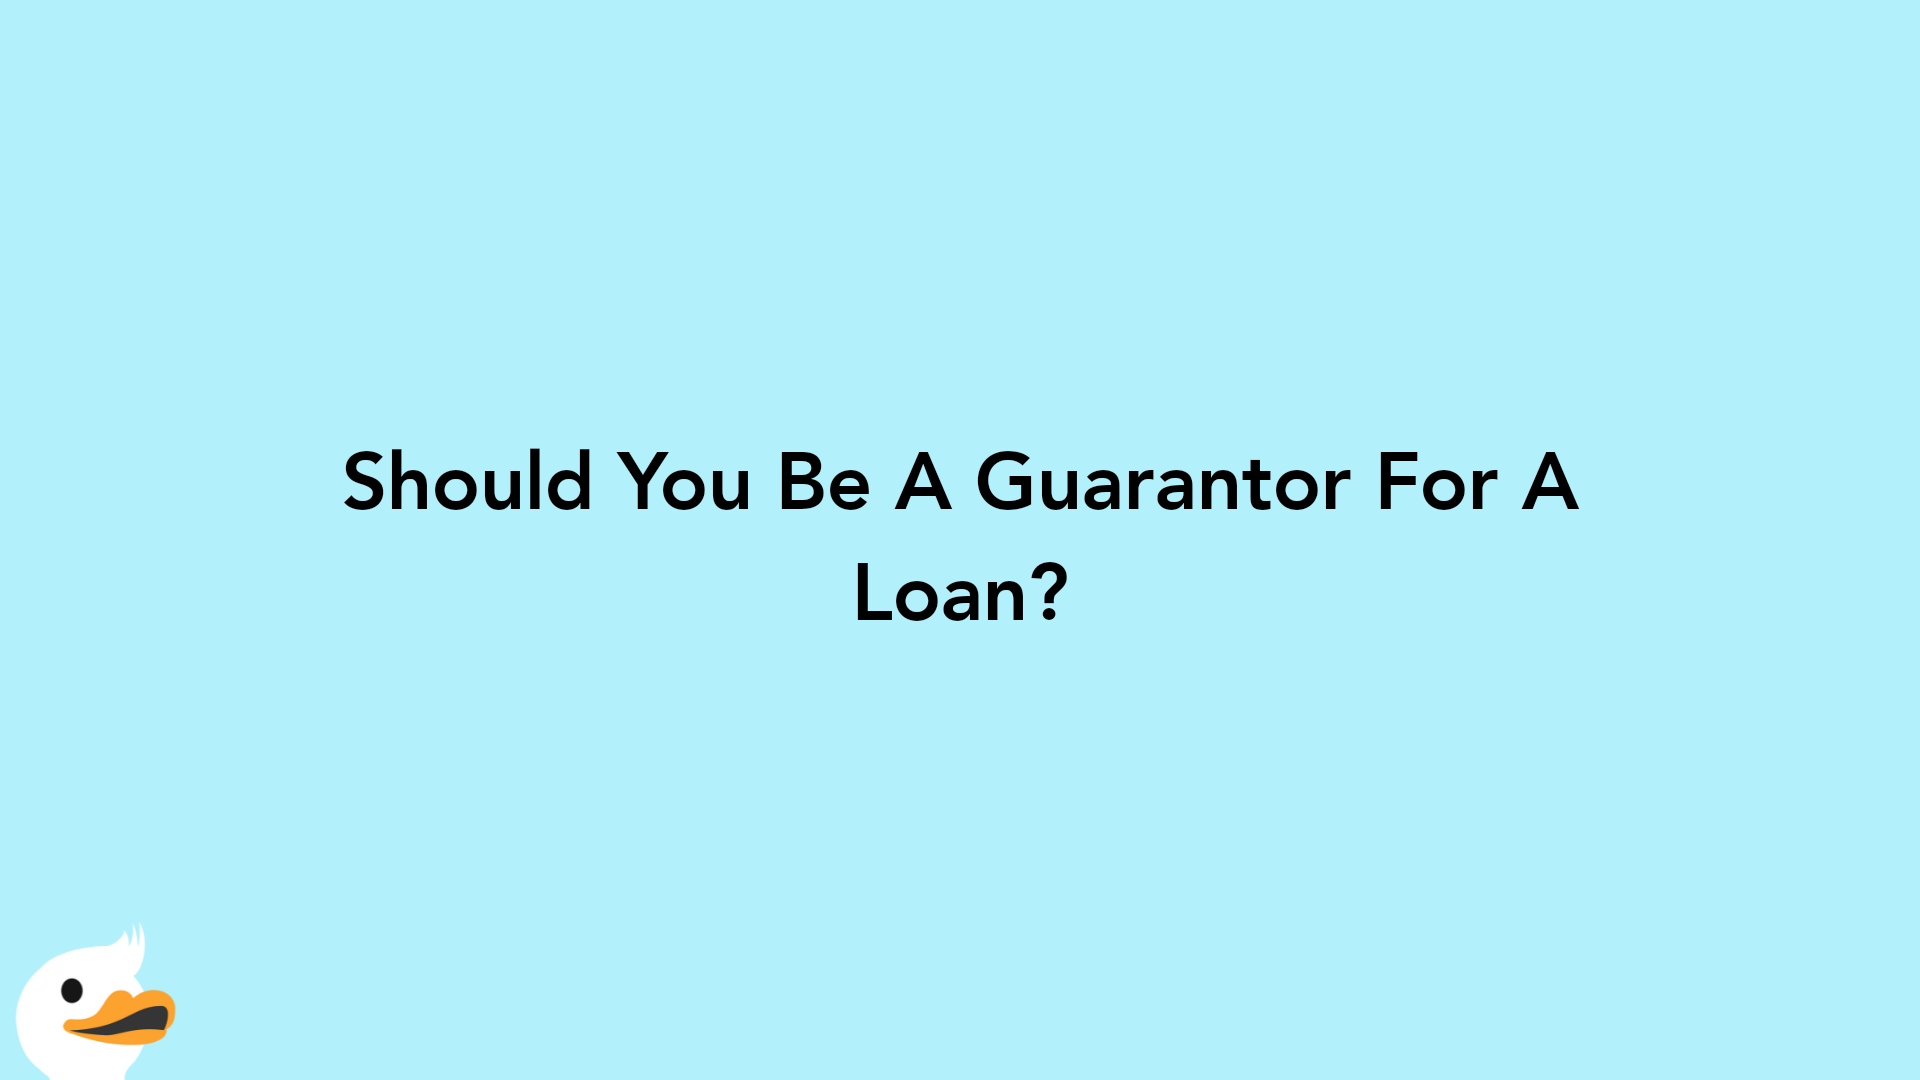 Should You Be A Guarantor For A Loan?